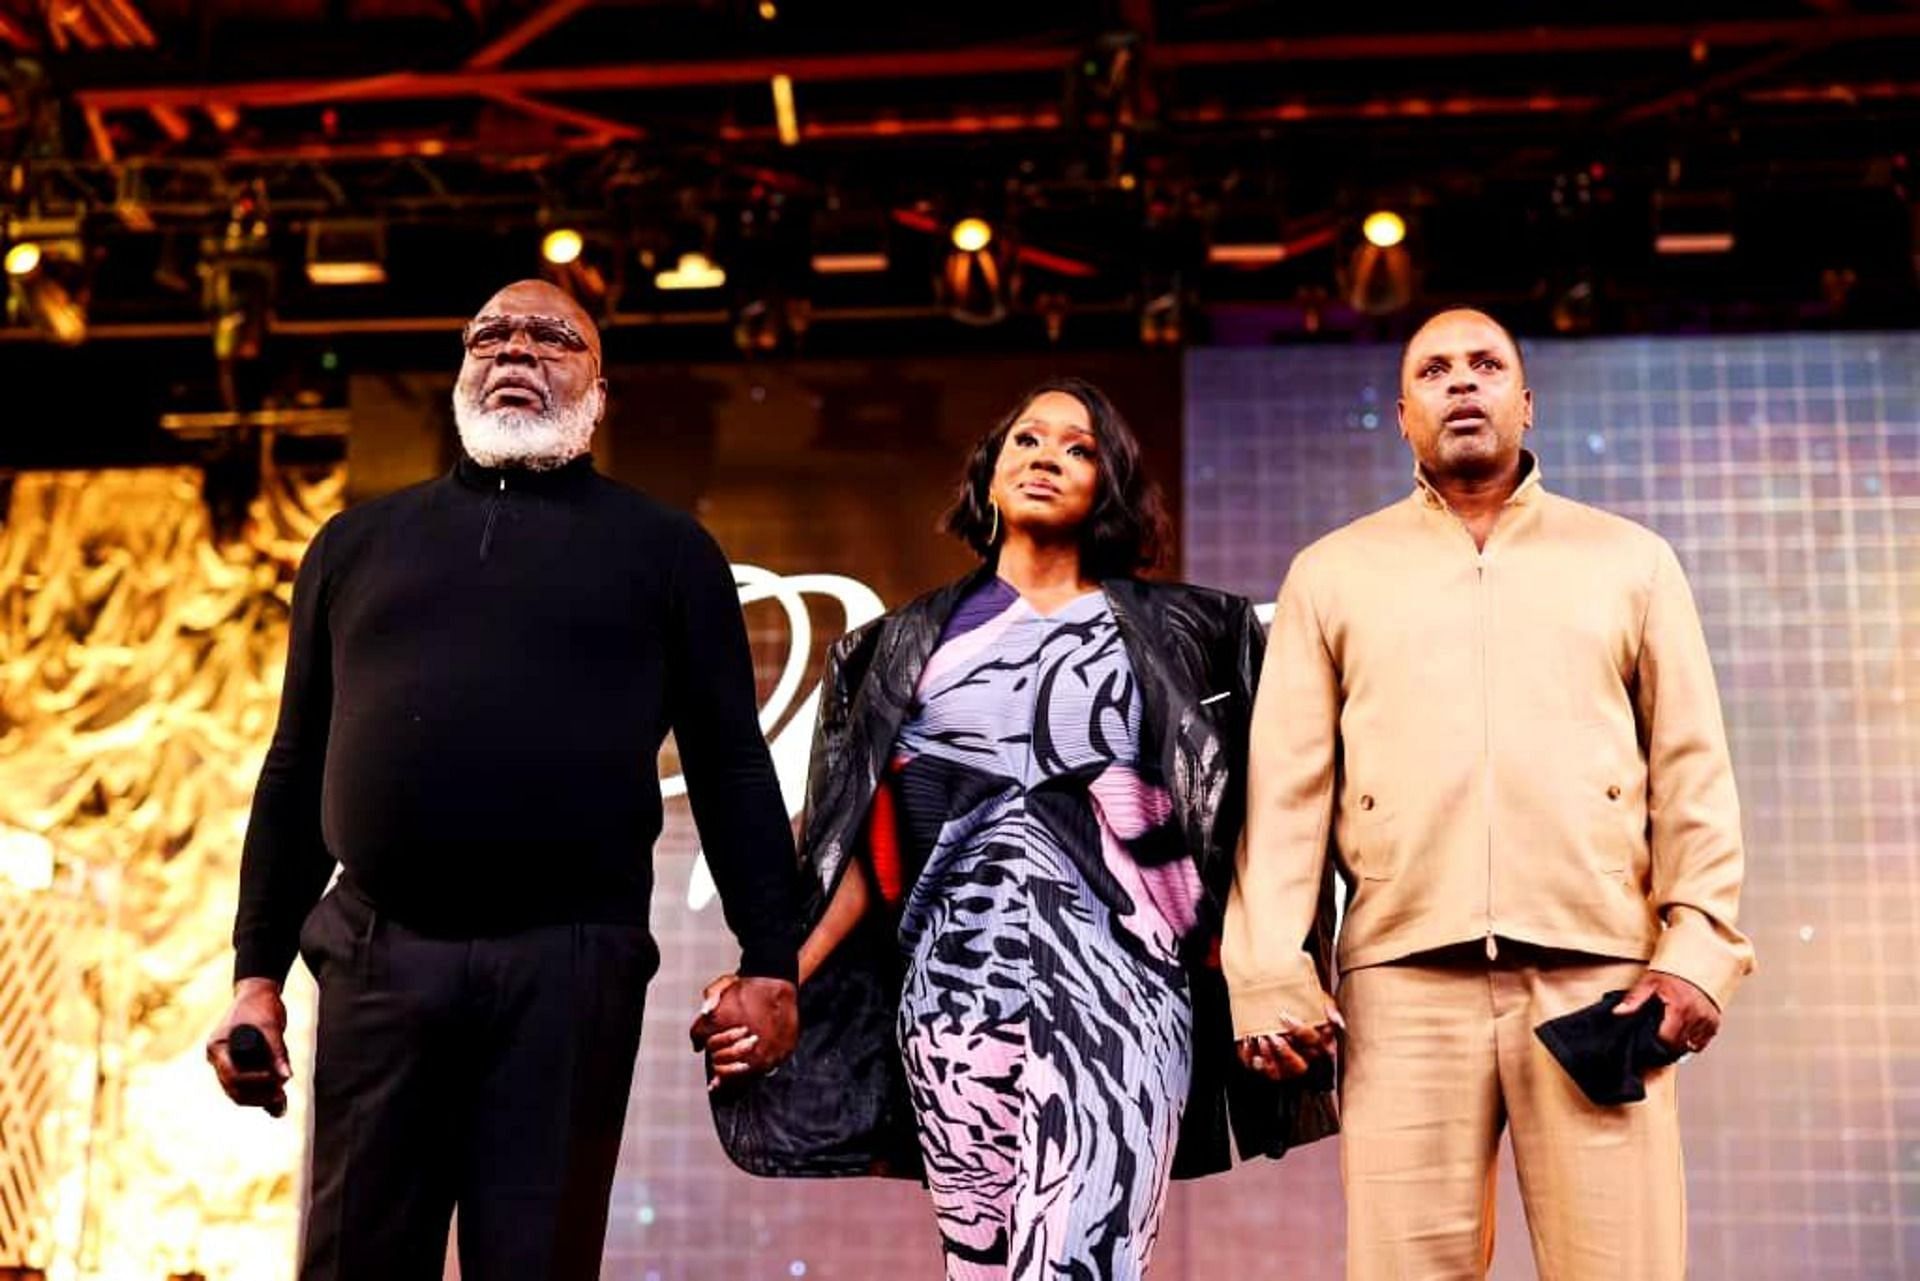 TD Jakes anoints Sarah Jakes Roberts as leader of ministry Woman, Thou Art Loosed (Image via Woman, Thou Art Loosed)